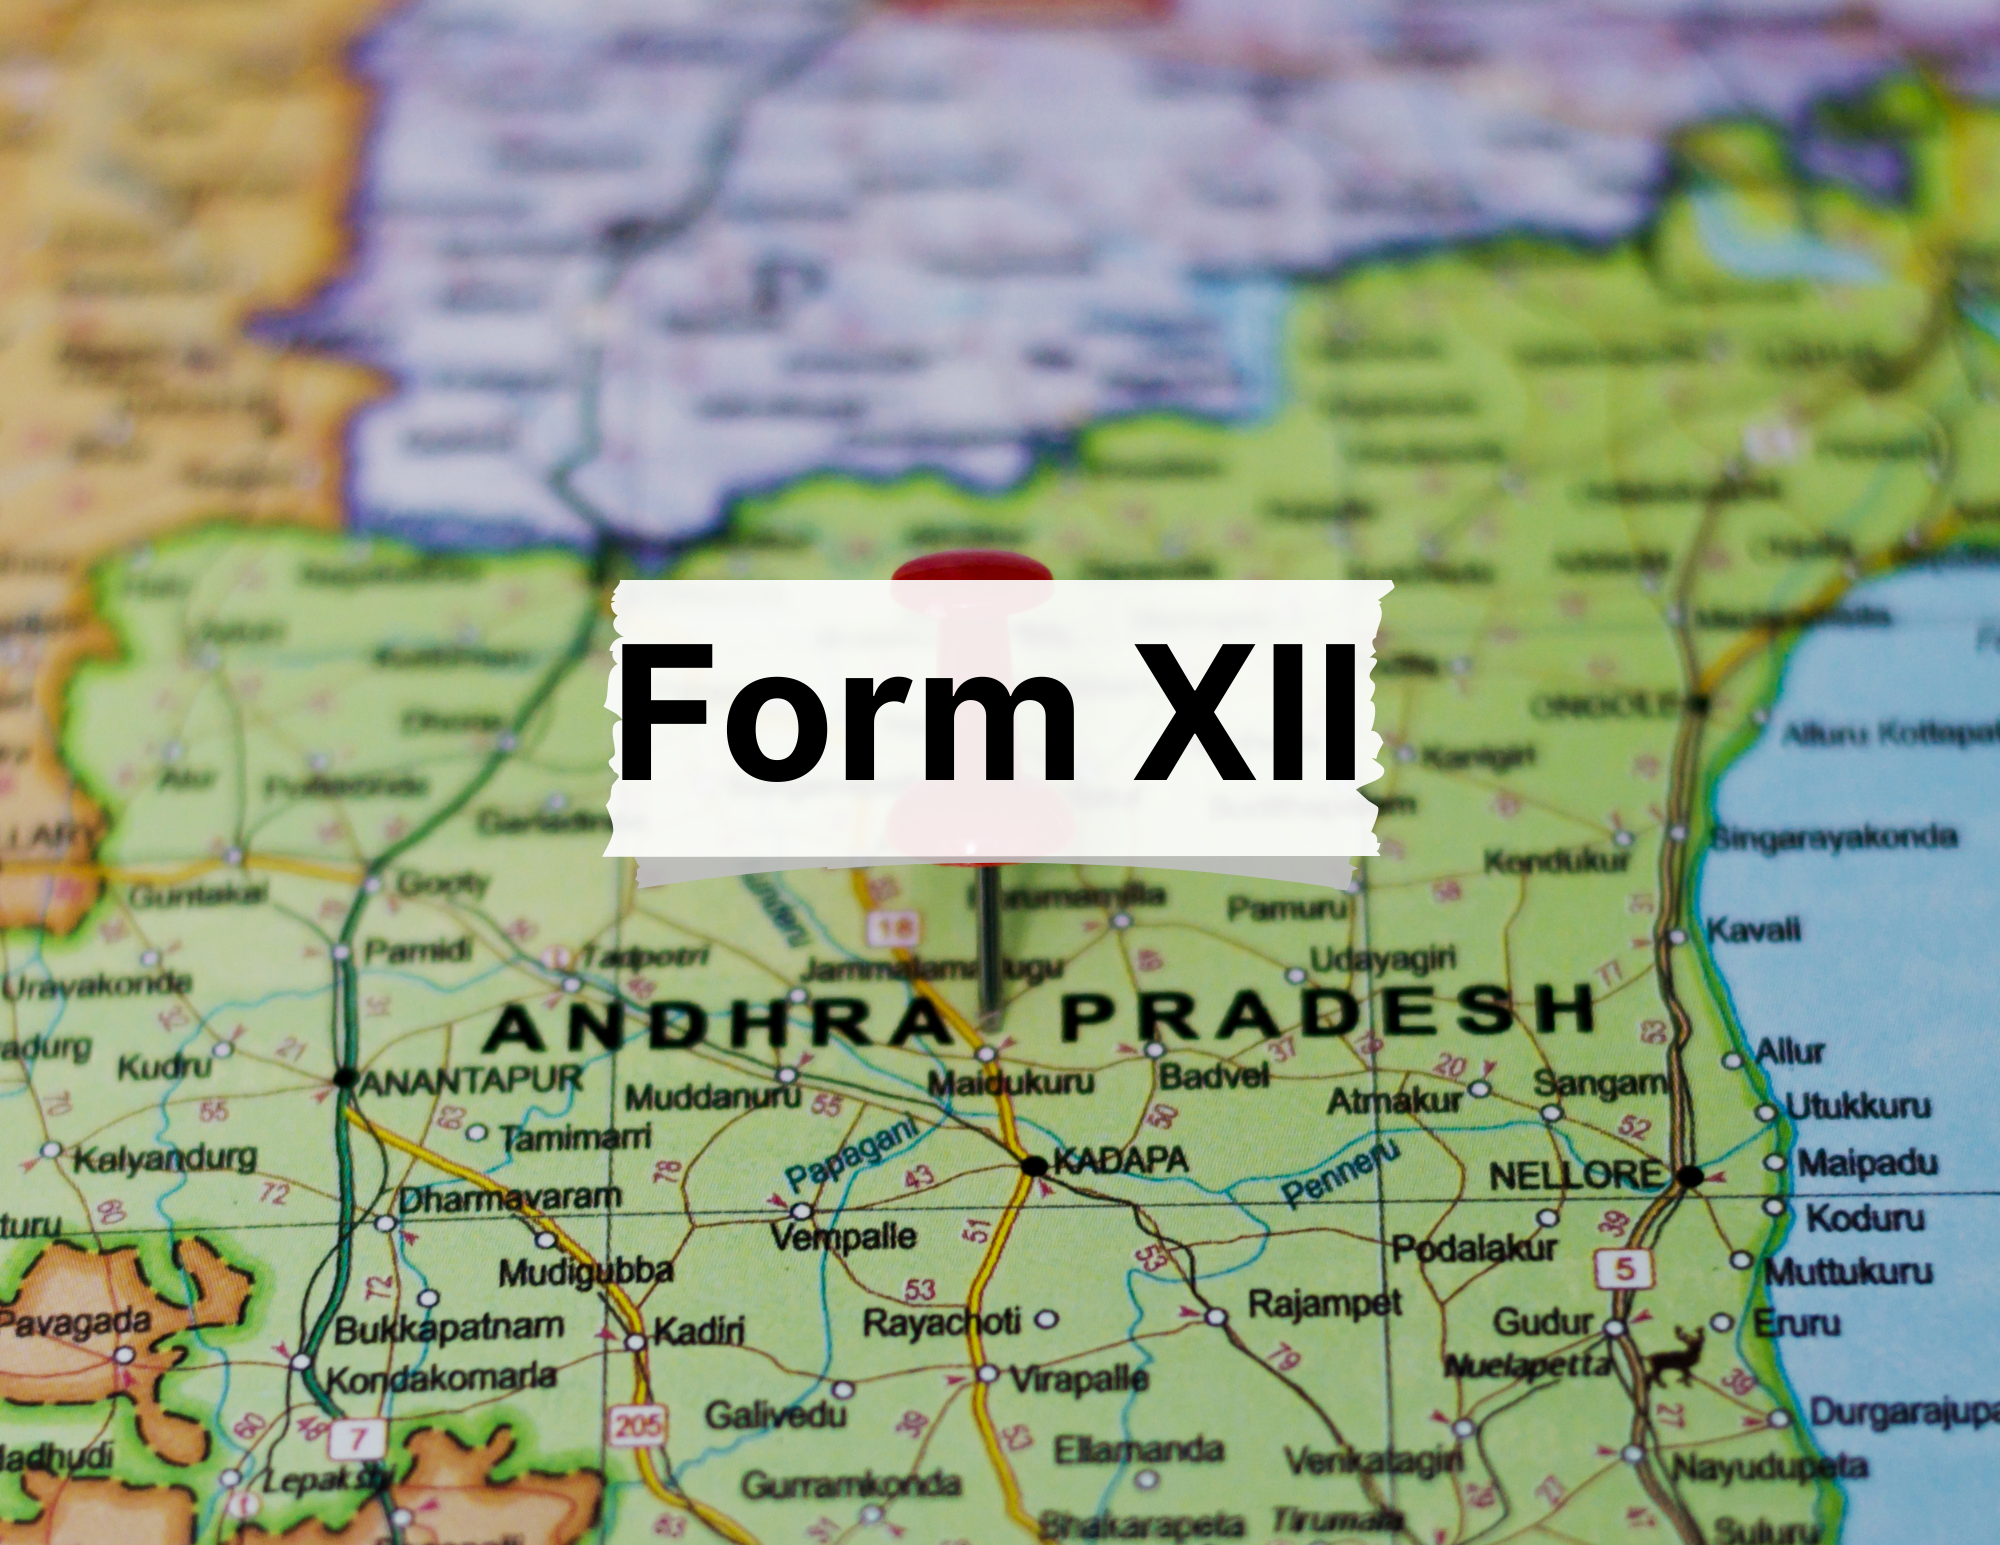 Andhra Pradesh - Form XII - Register of Advance of Wages